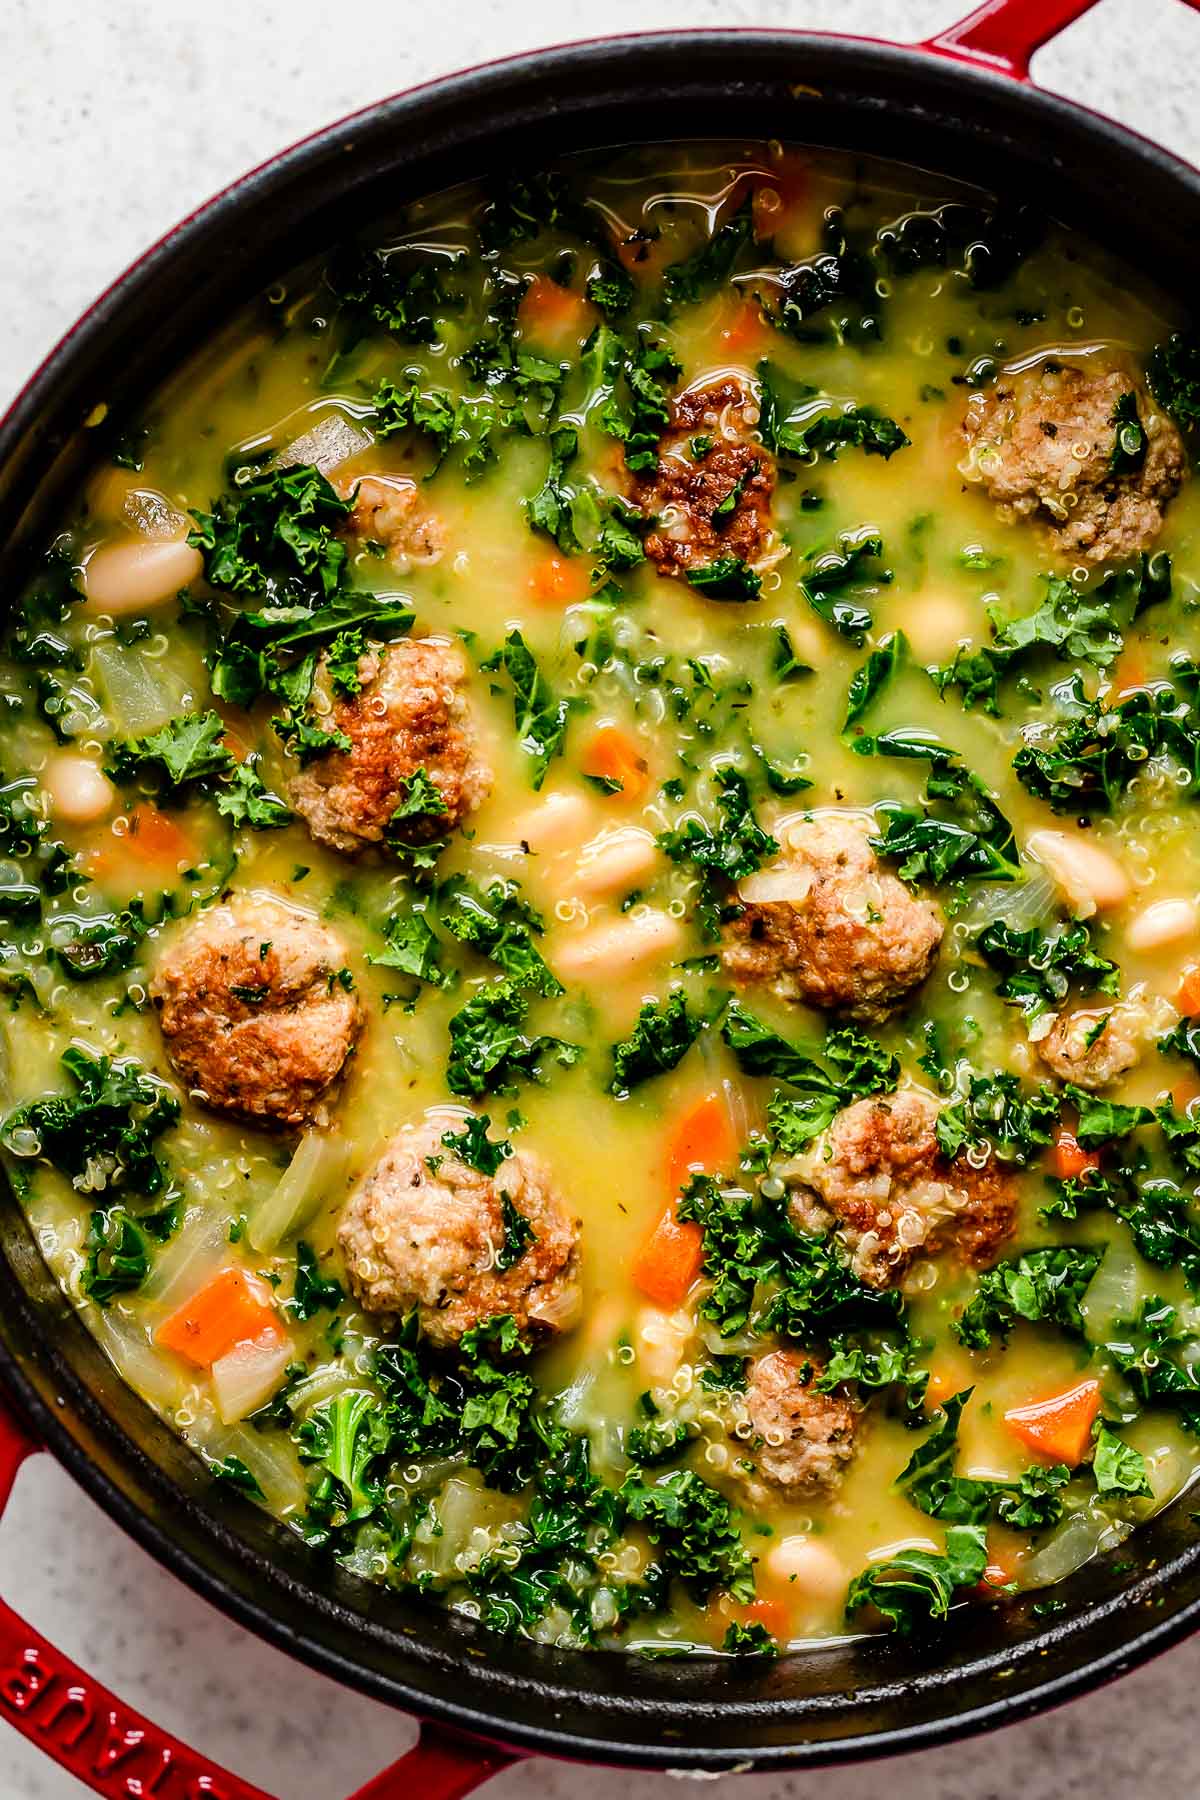 Italian wedding soup simmers inside of a large red pot. The pot sits atop a creamy white textured surface.